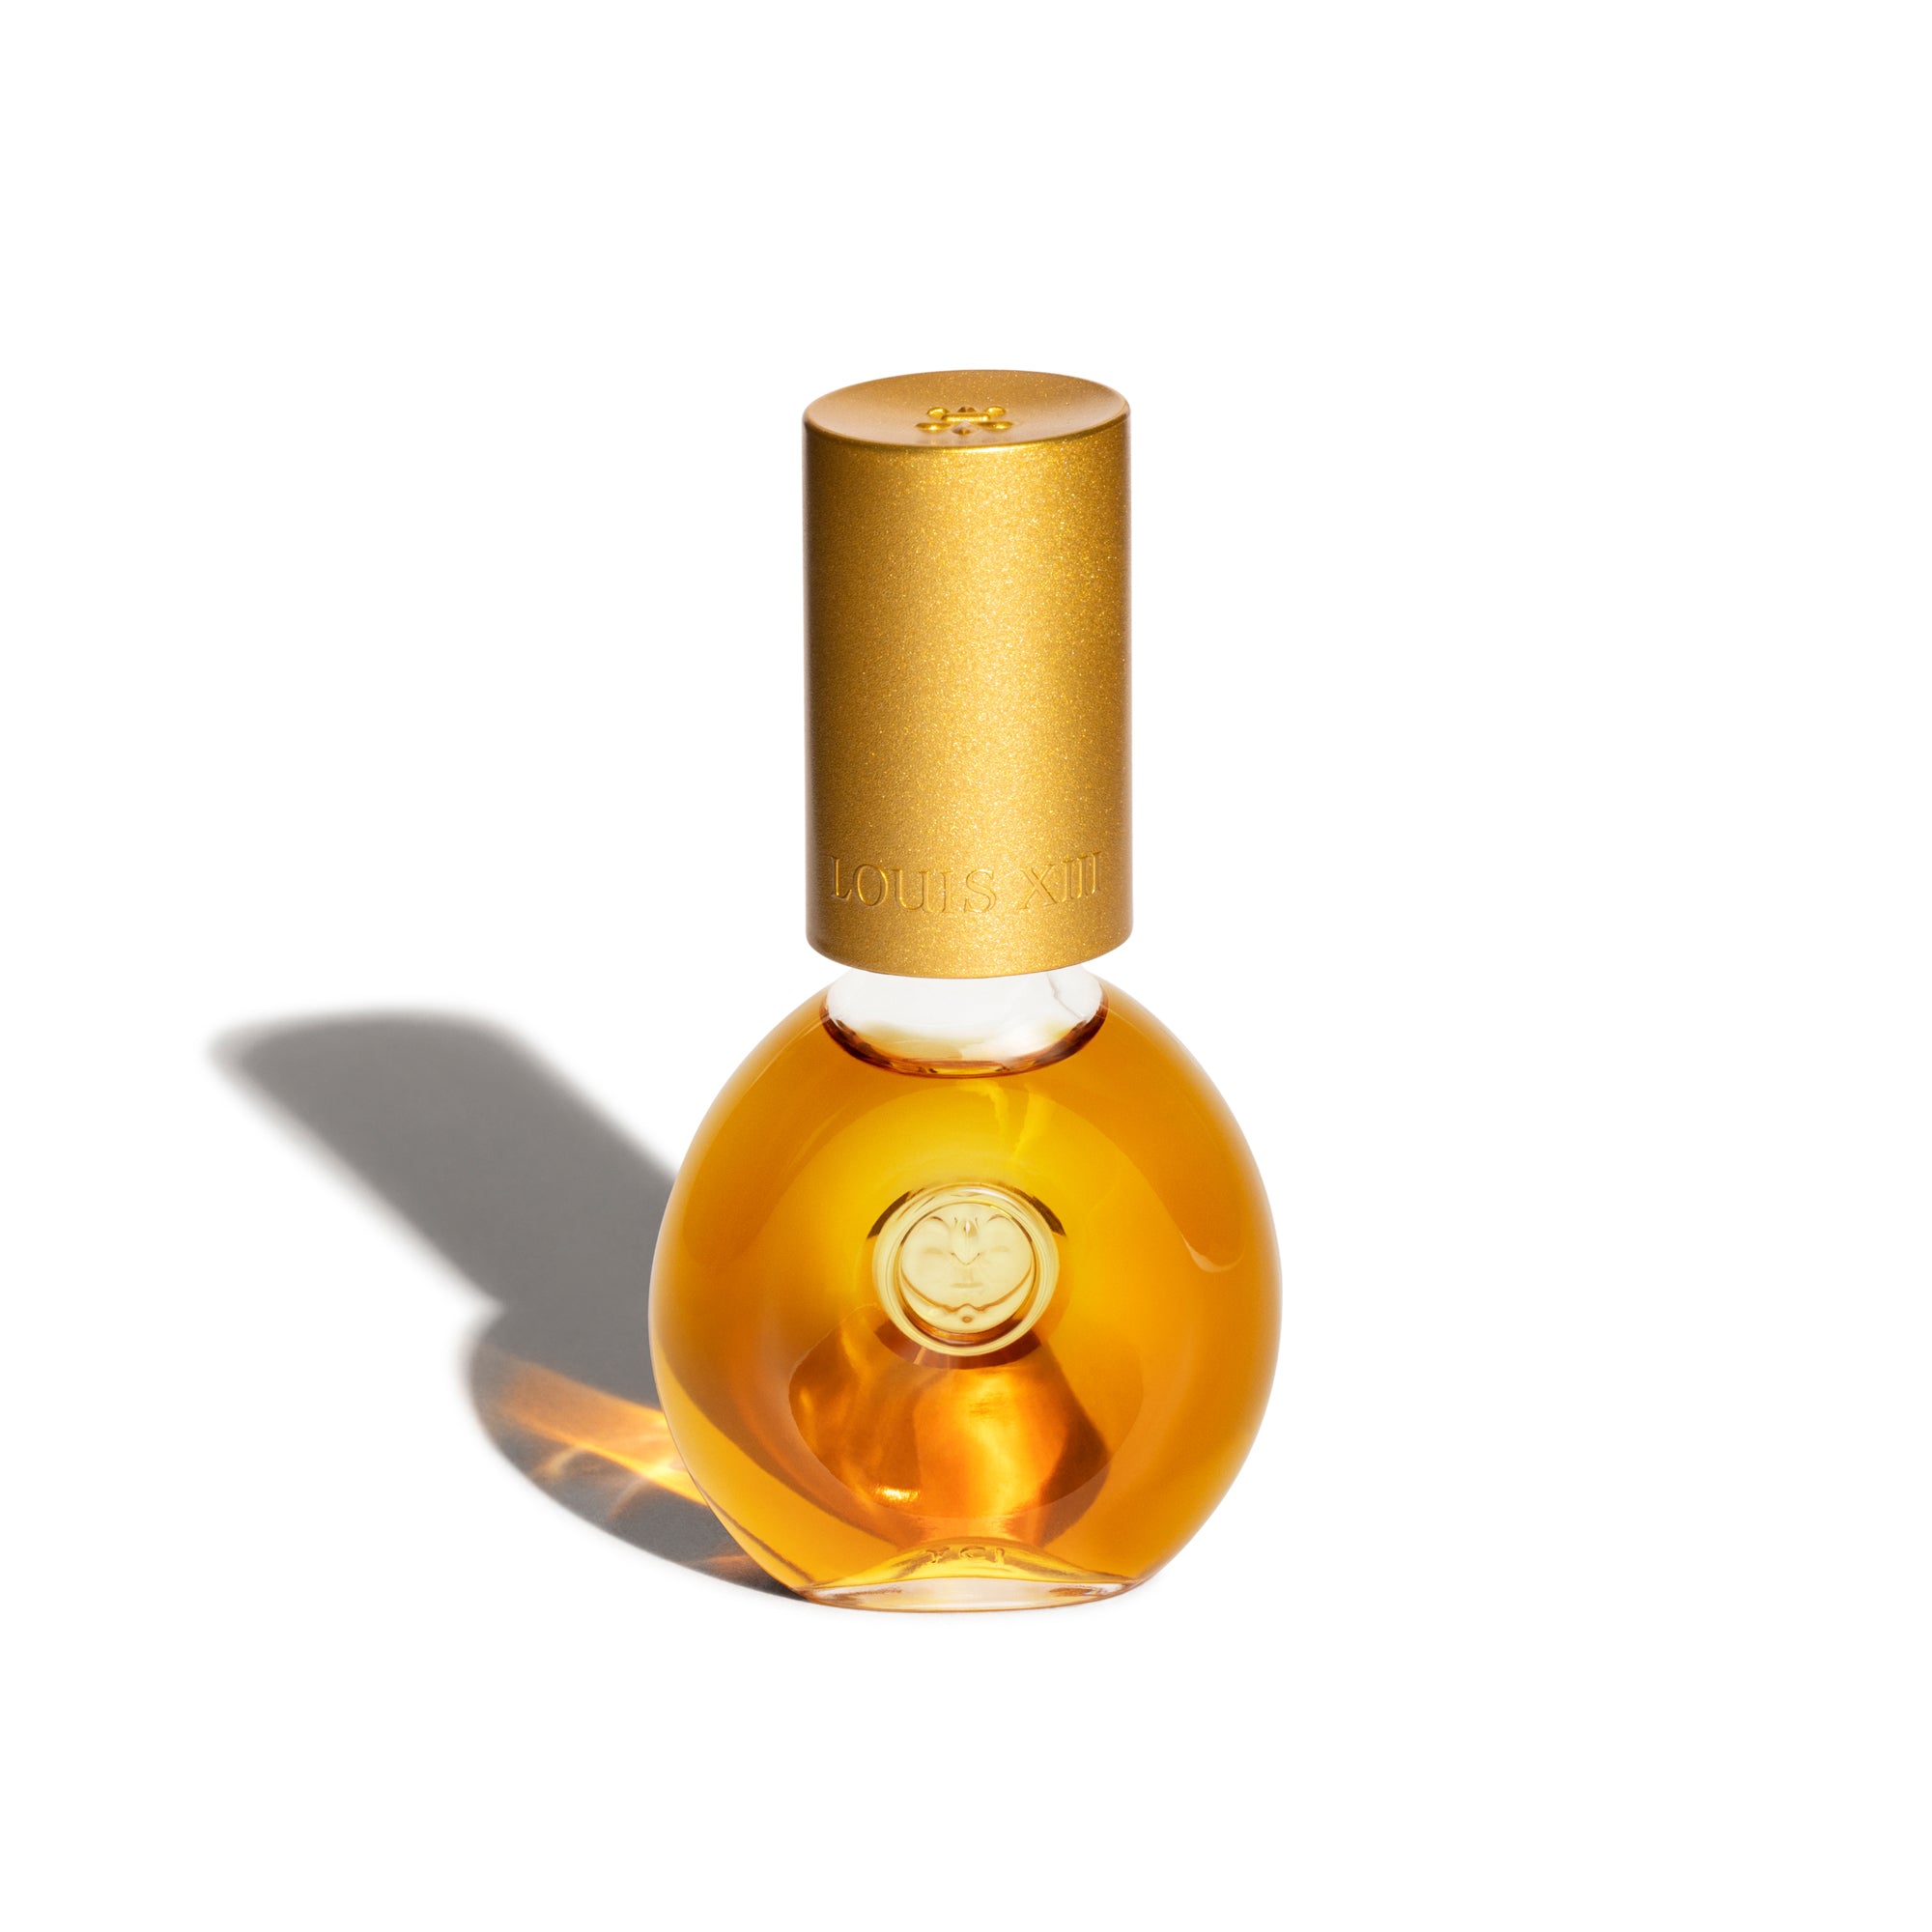 A packshot of LOUIS XIII DROP bottle, edition gold, on a white image